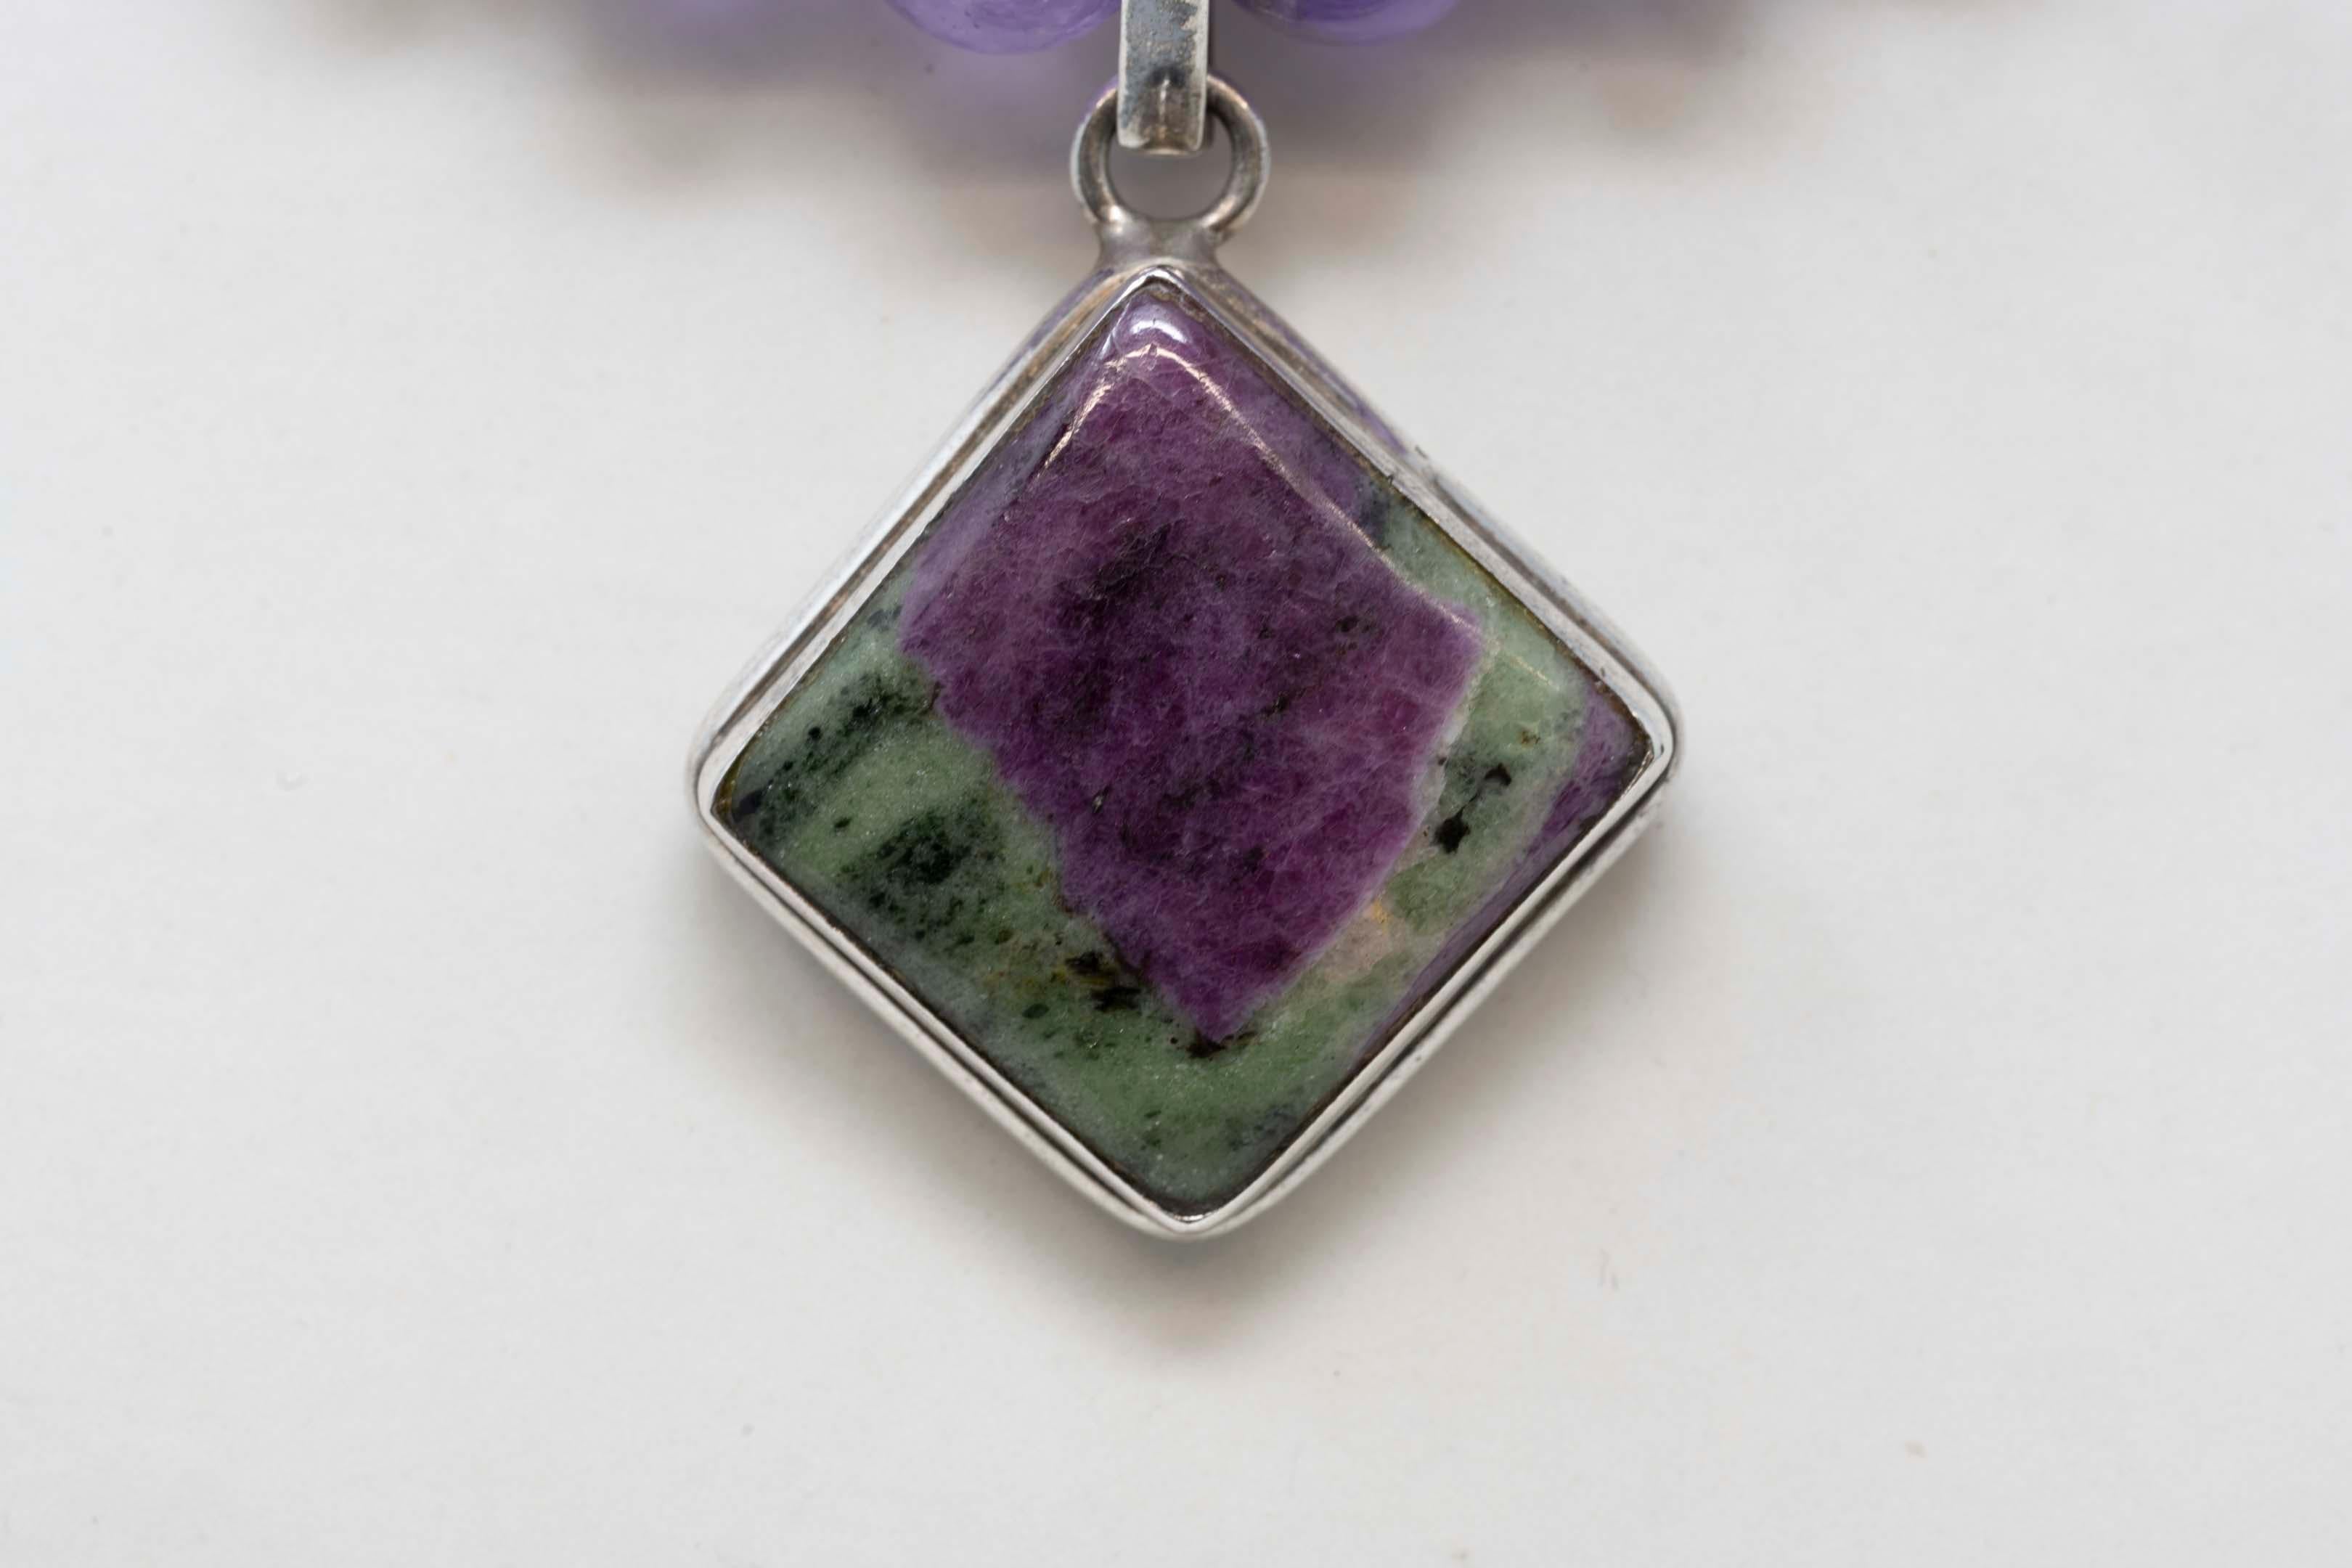 Vintage sterling silver amethyst 10mm beads and silver pendant with ruby-zoisite. Genuine stone from Tanzania, measures 18 inches long. Pendant measures 1 1/4 inches x 1 1/4 inches, stamped 925. 
